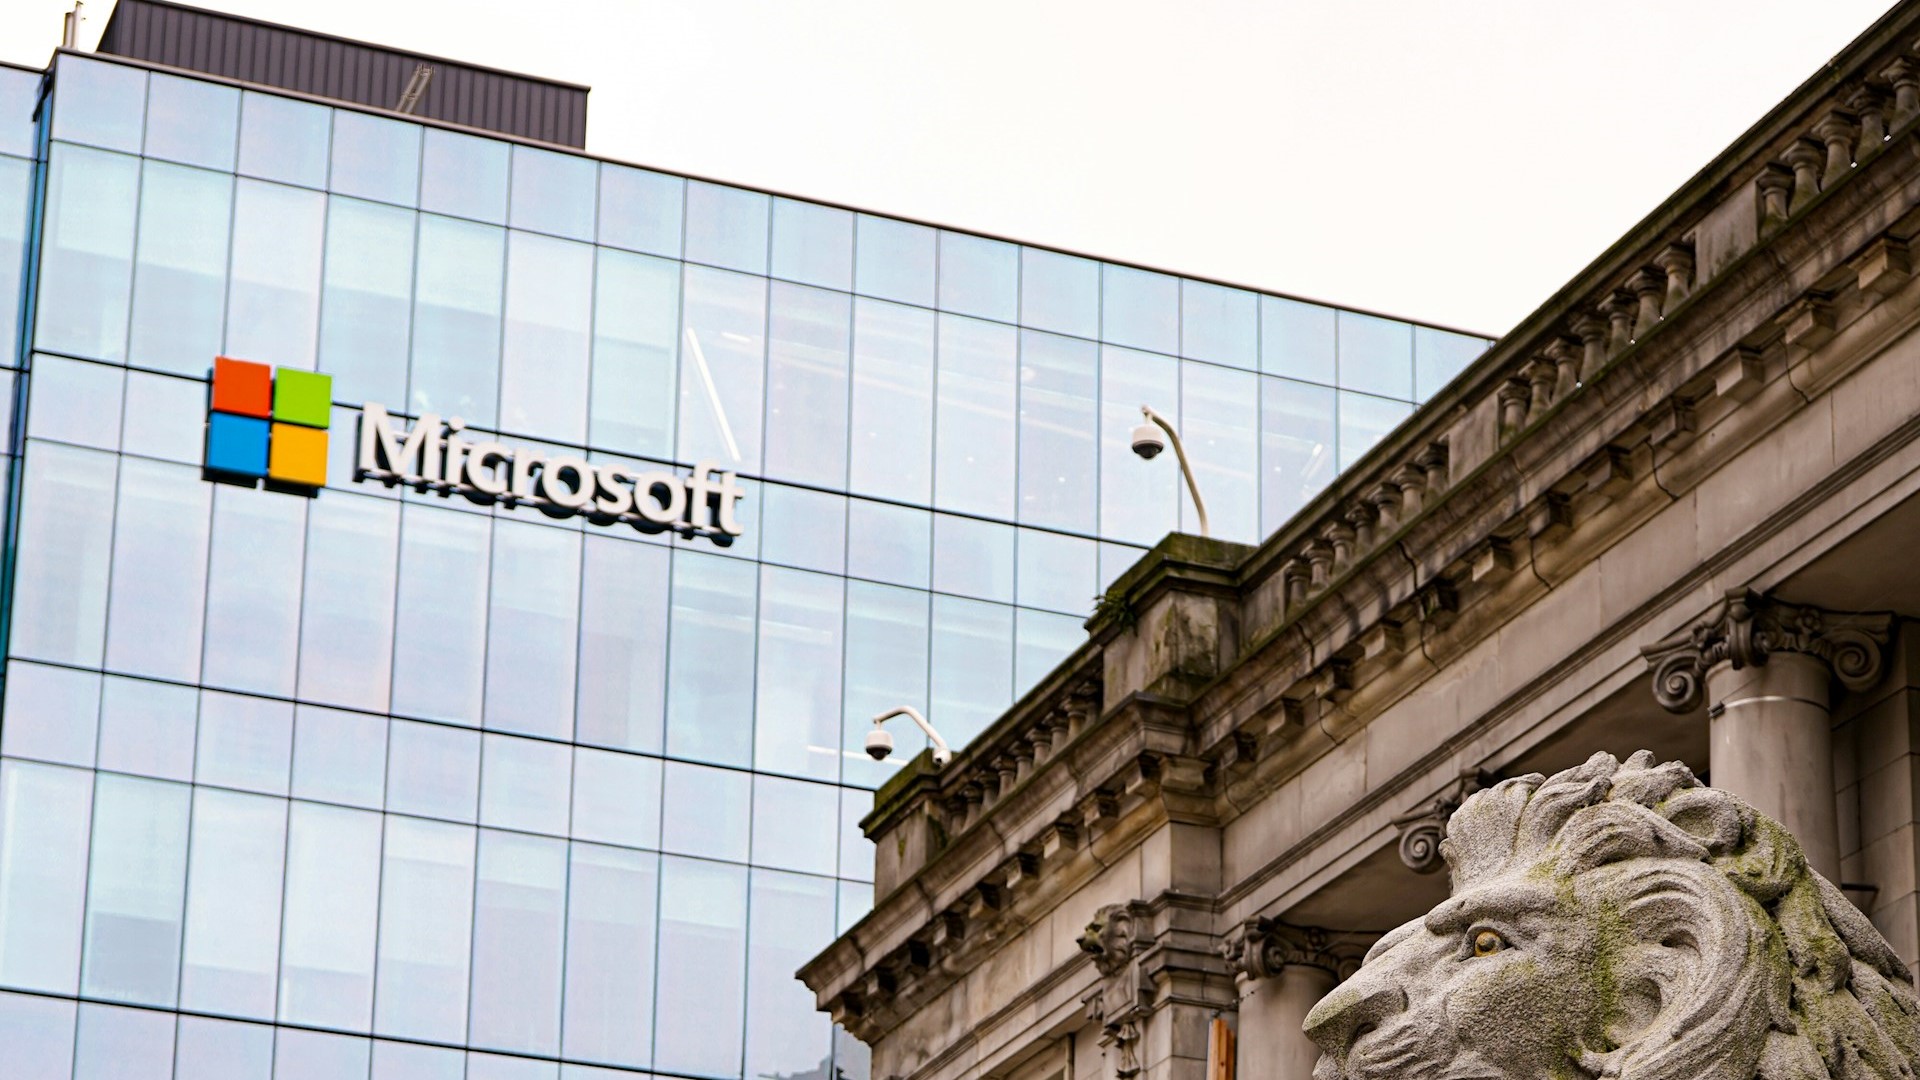 Microsoft expected to outperform Apple in market value (Credits: The Software Report)